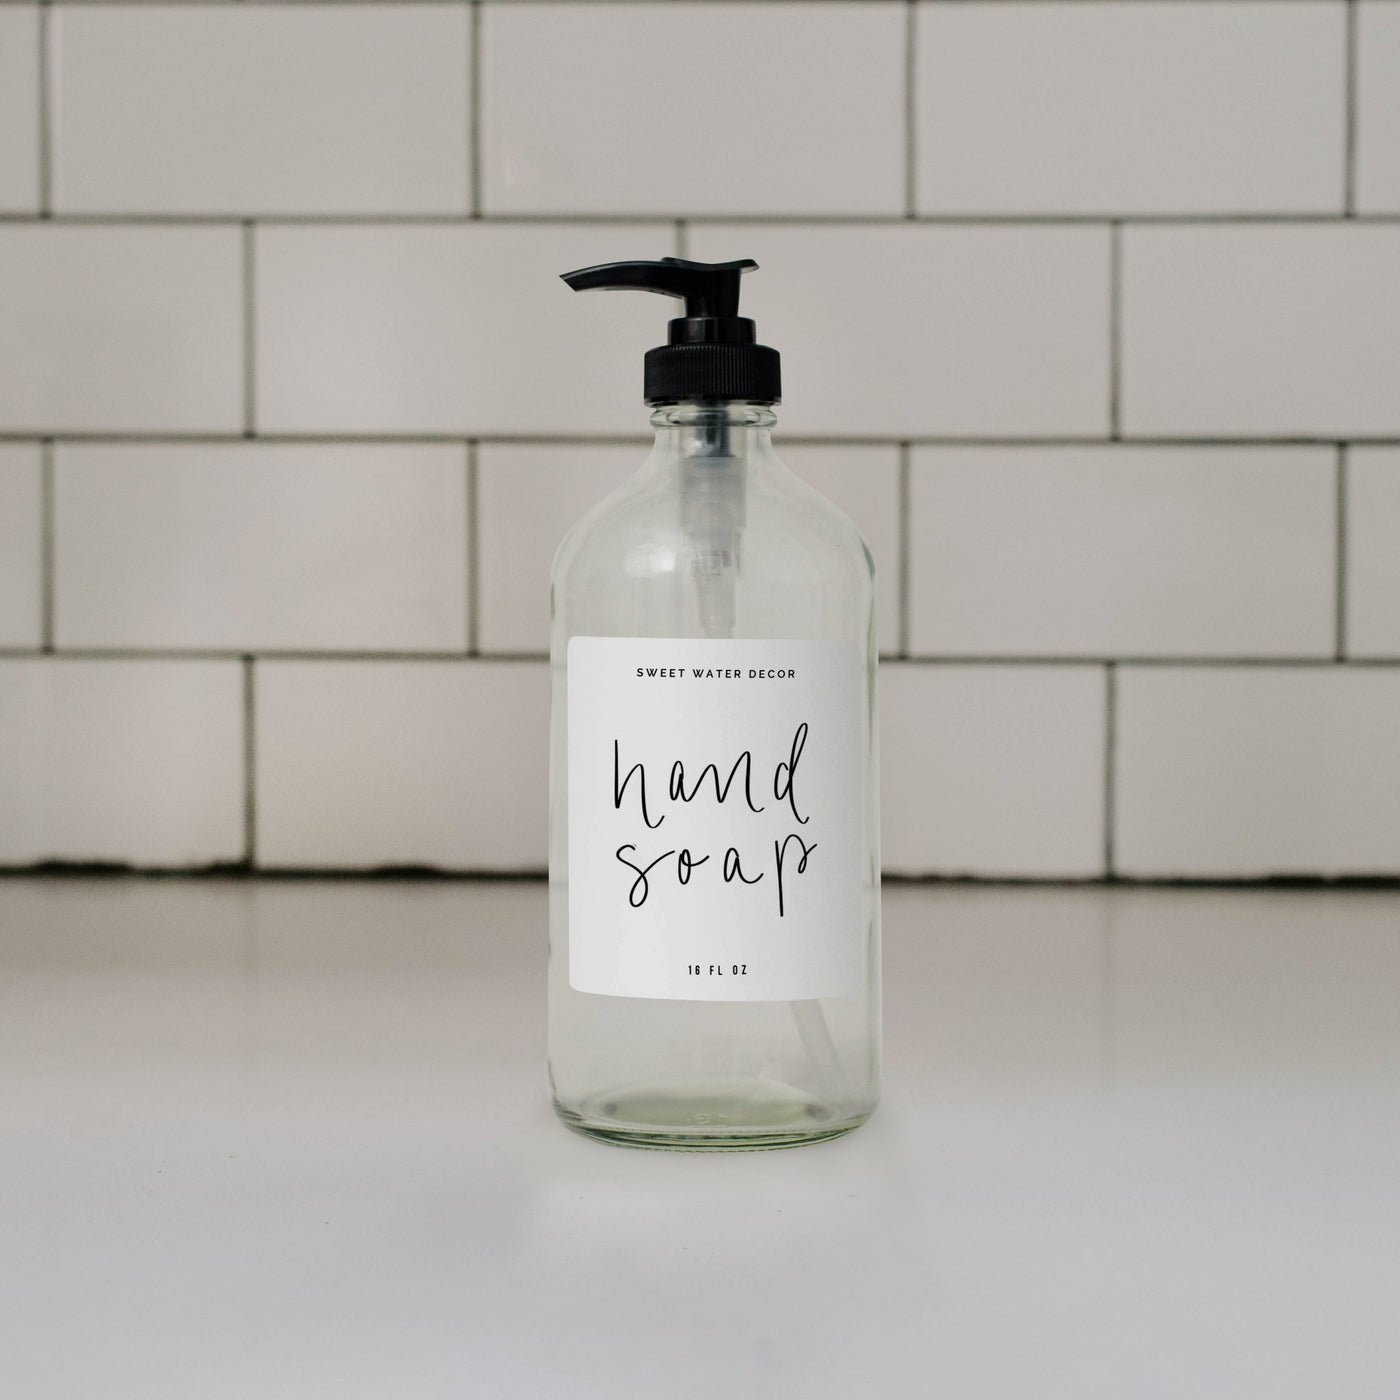 16oz Clear Glass Hand Soap Dispenser - White Label - Sweet Water Decor - Dispensers